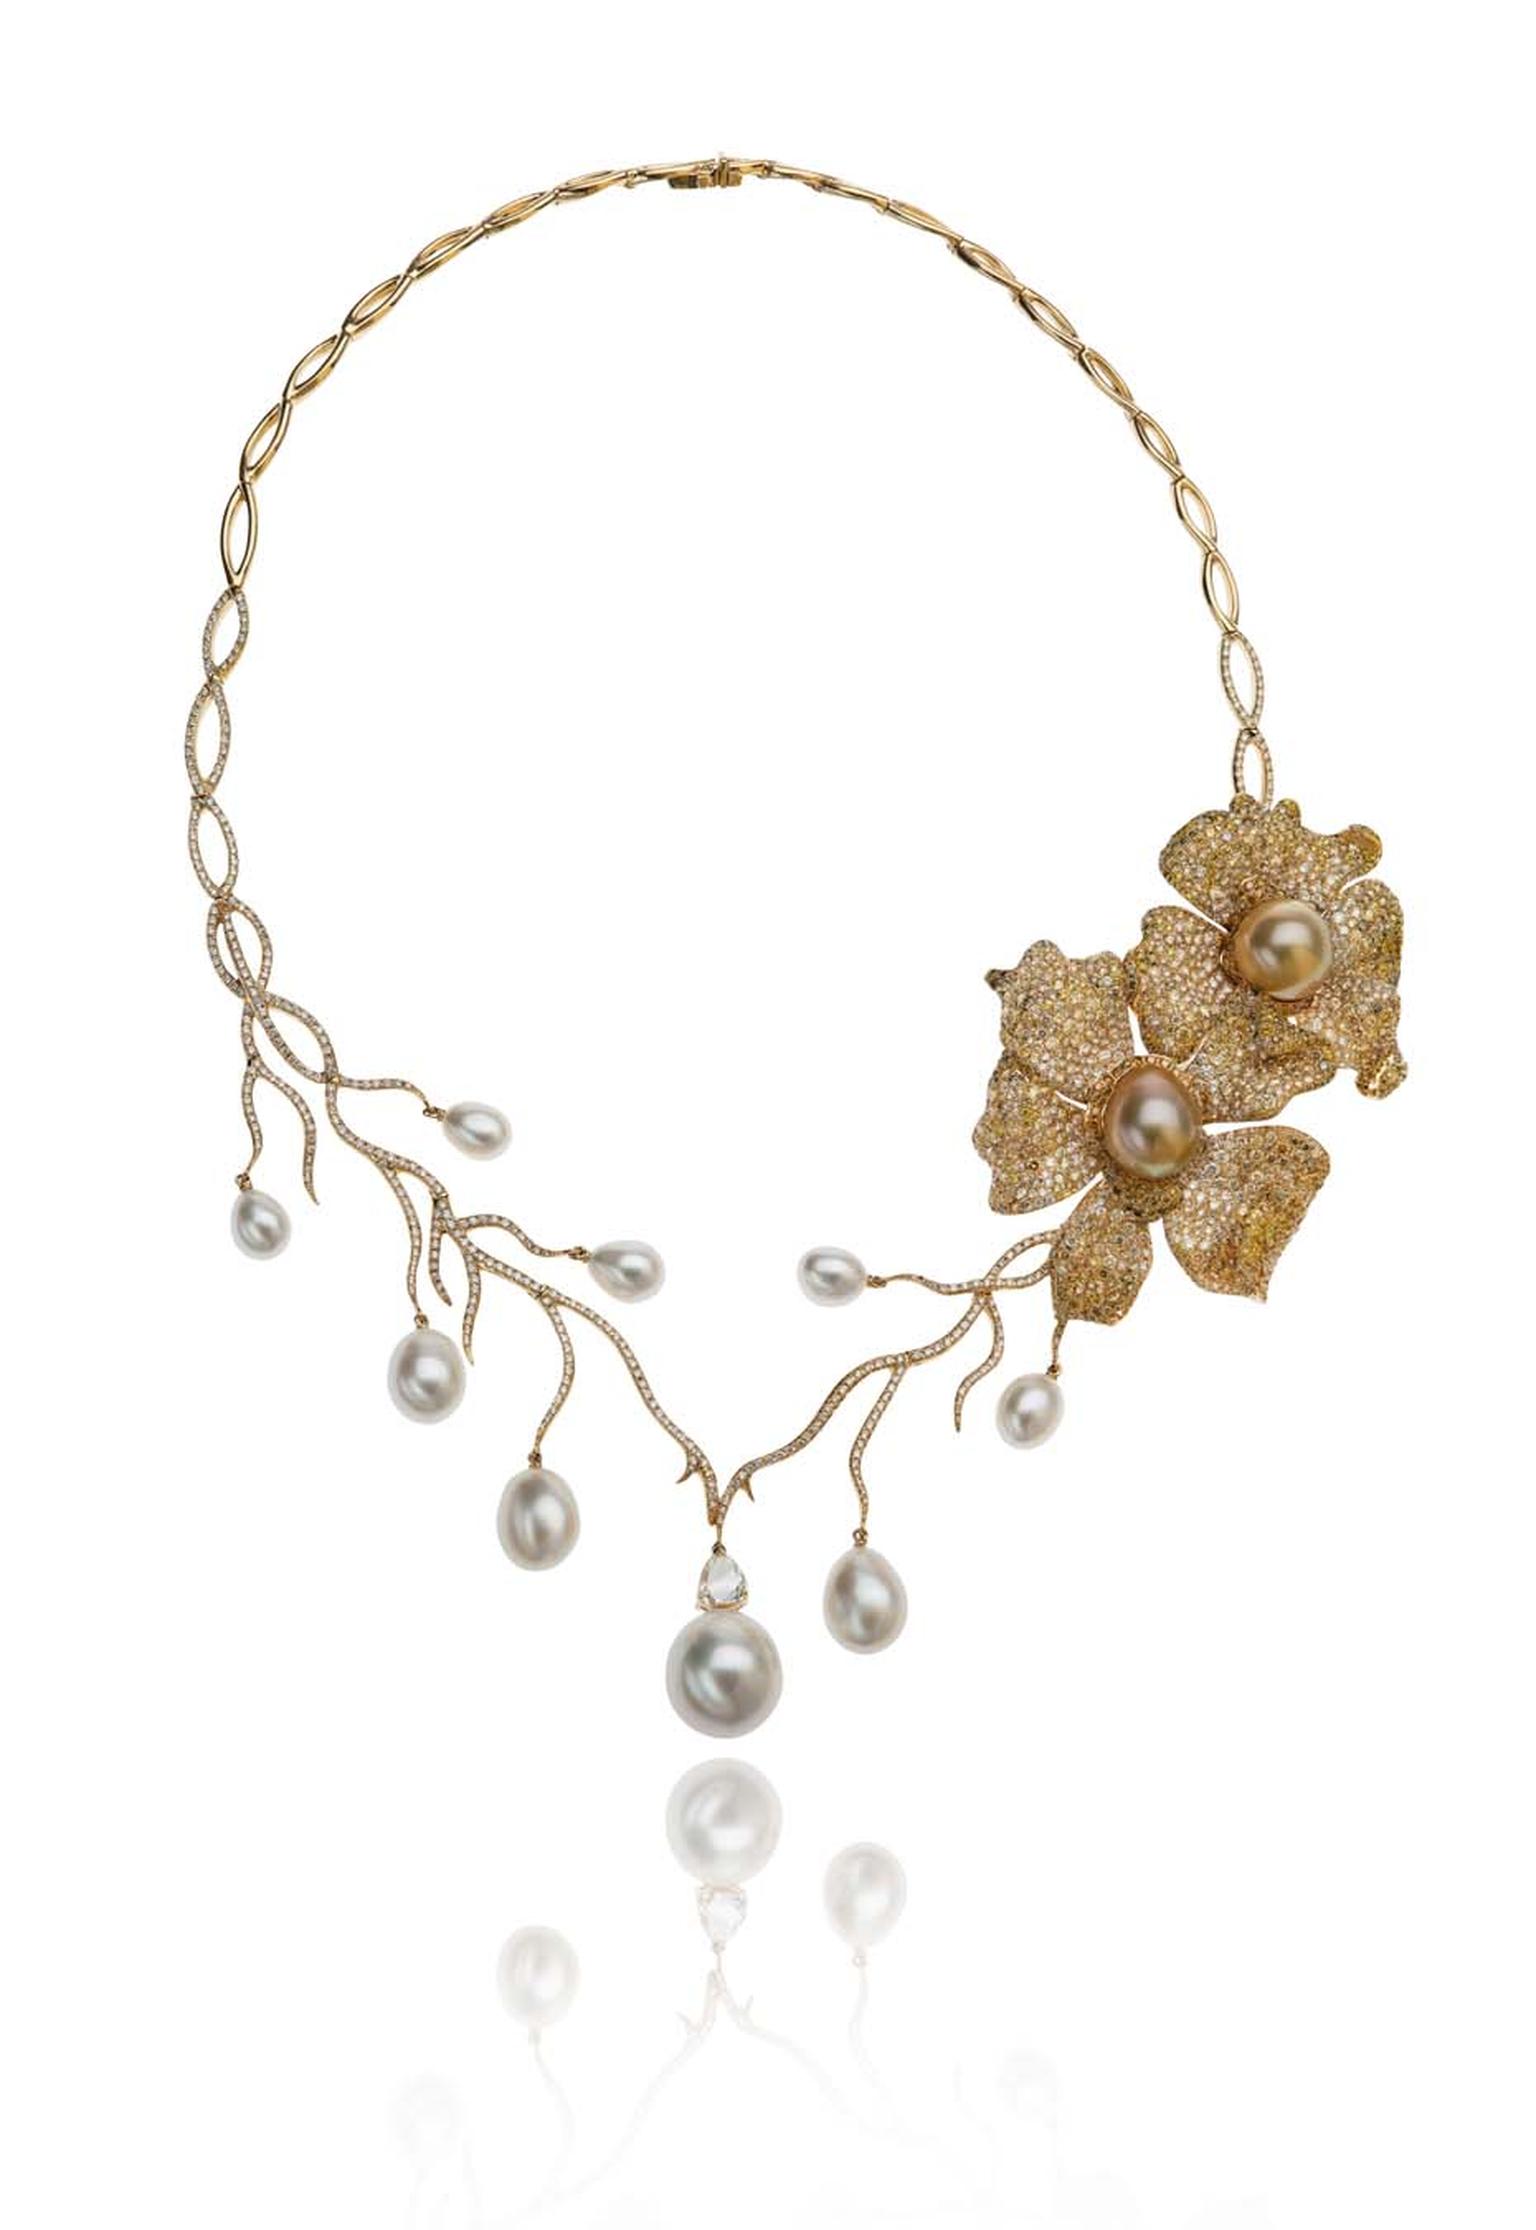 Autore's new Orchid collection, including this exquisite orange blossom pearl necklace, explores the intricate qualities of both South Sea pearls and native Australian Orchids, combining the individuality of two of nature's greatest treasures.